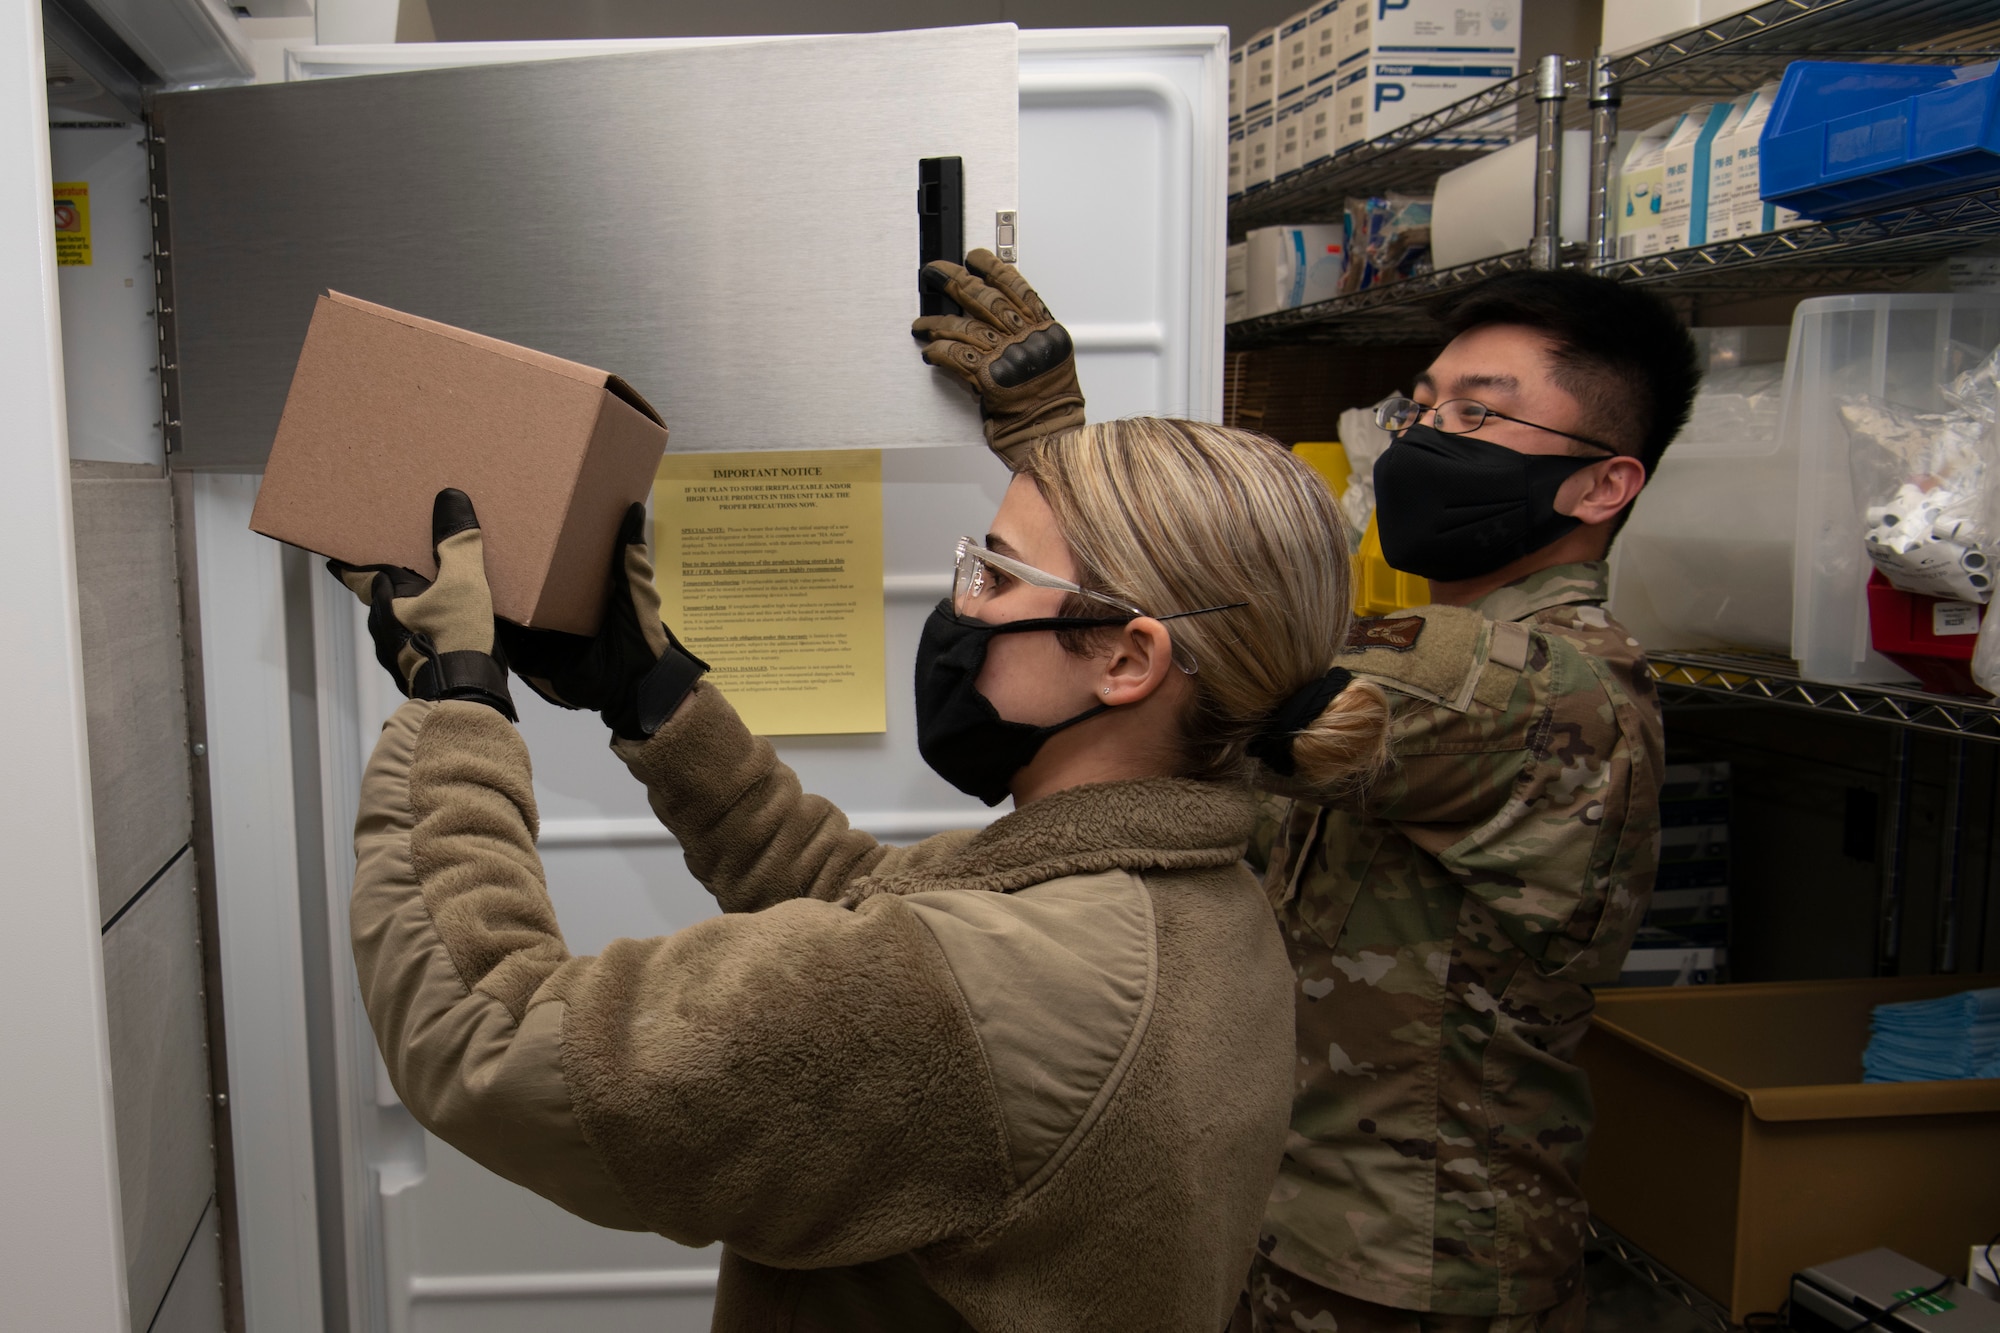 U.S. Air Force Airman 1st Class Jennifer De La Guardia Rodriguez, 509th Healthcare Operations Squadron medical logistics technician, left, and Staff Sgt. Allen Magbutay, 509th HCOS NCO in charge of medical materiel, place the first shipment of the COVID-19 vaccine in the freezer at Whiteman Air Force Base, Missouri, Dec. 30, 2020. The Whiteman AFB COVID-19 vaccine distribution and administration plan will implement a phased, standardized and coordinated strategy for prioritizing, distributing, and administering COVID-19 vaccines to installation personnel. (U.S. Air Force photo by Staff Sgt. Dylan Nuckolls)